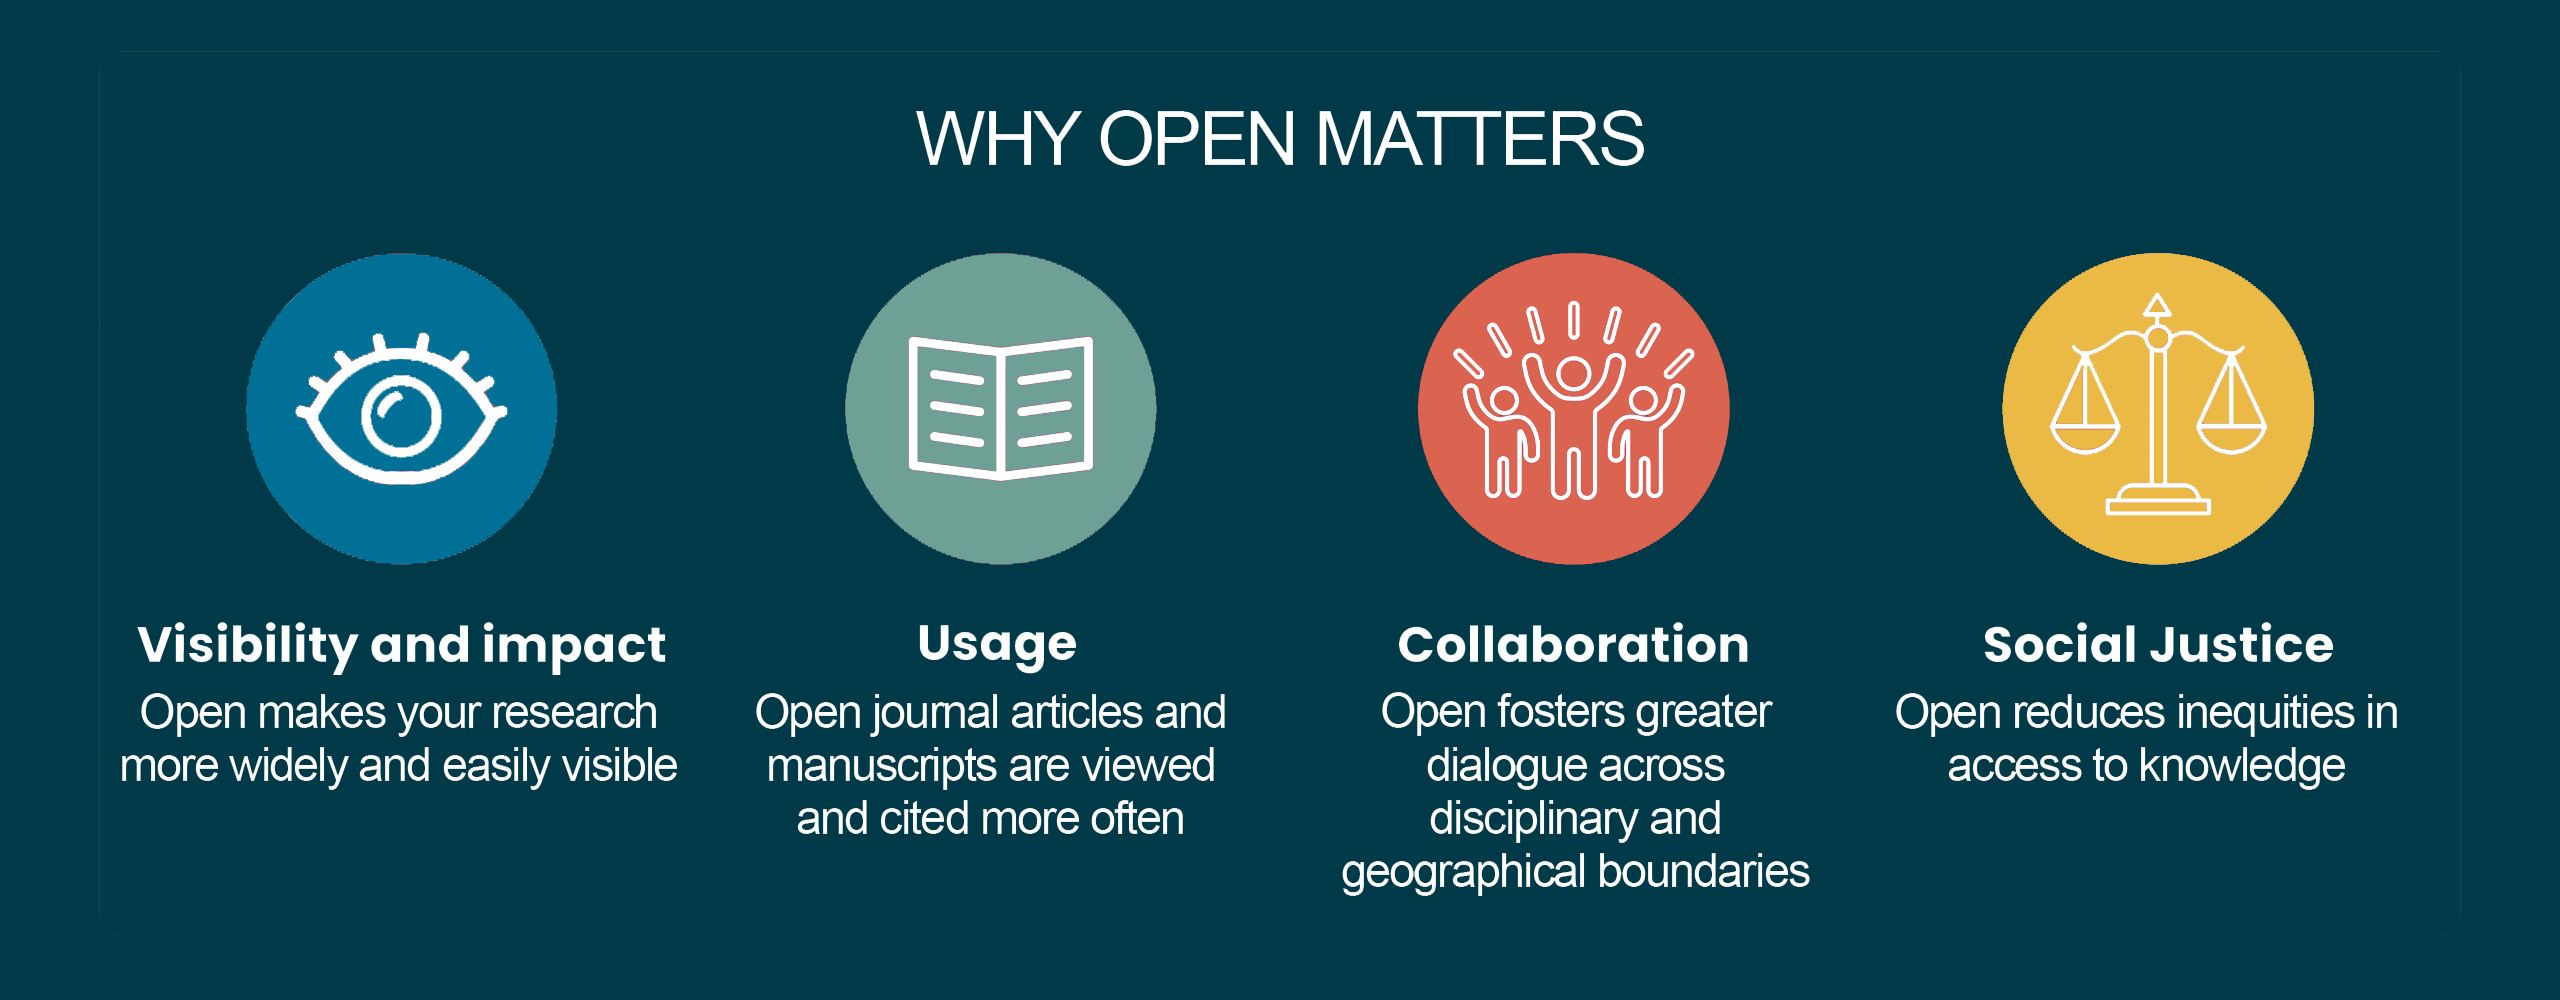 infographic on why open matters, visibility and impact, usage, collaboration, and social justice